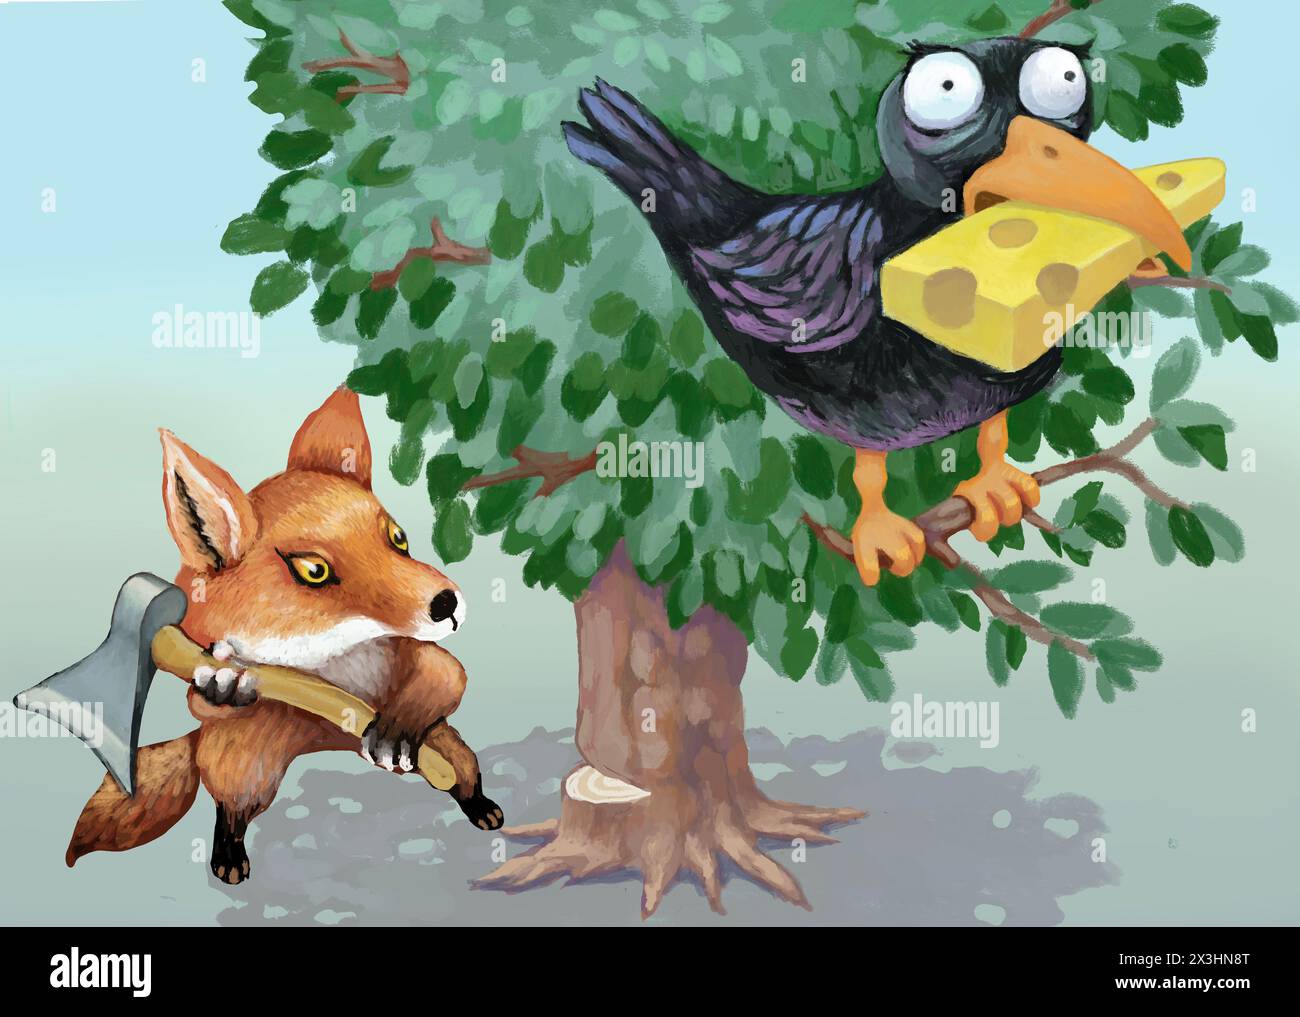 metaphor of aggressive policy, fox not trying to persuade the crow to let go of the cheese but cutting down the tree Stock Photo